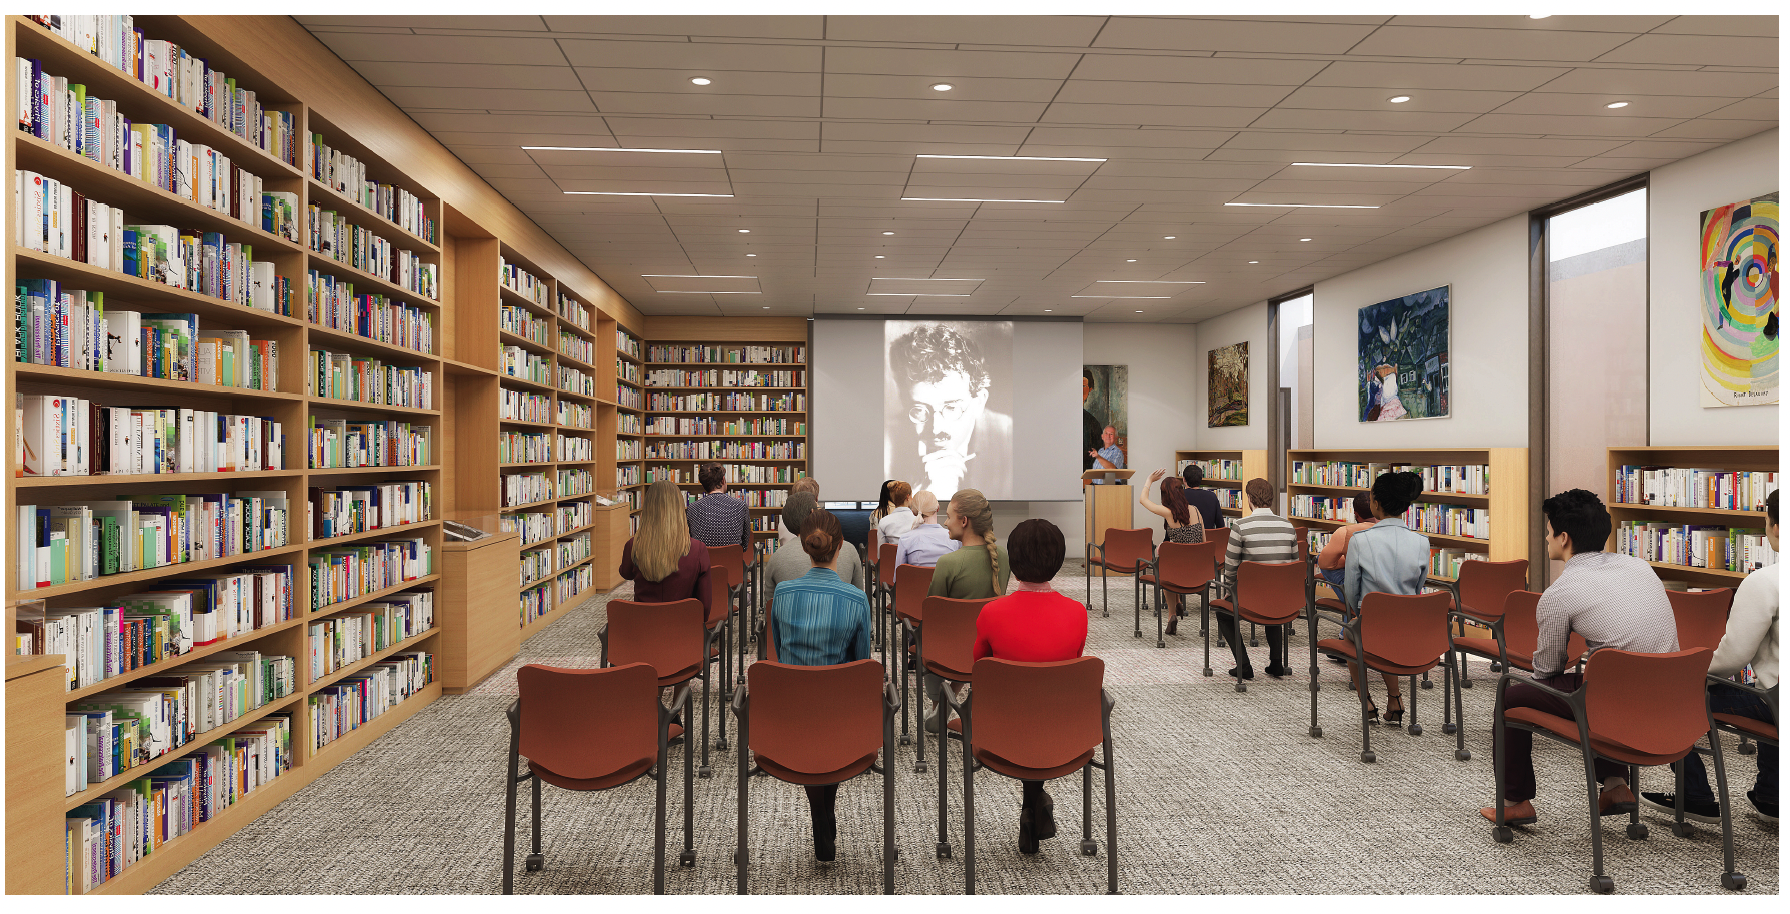 Artist’s rendering of the new Tauber Library and Archives